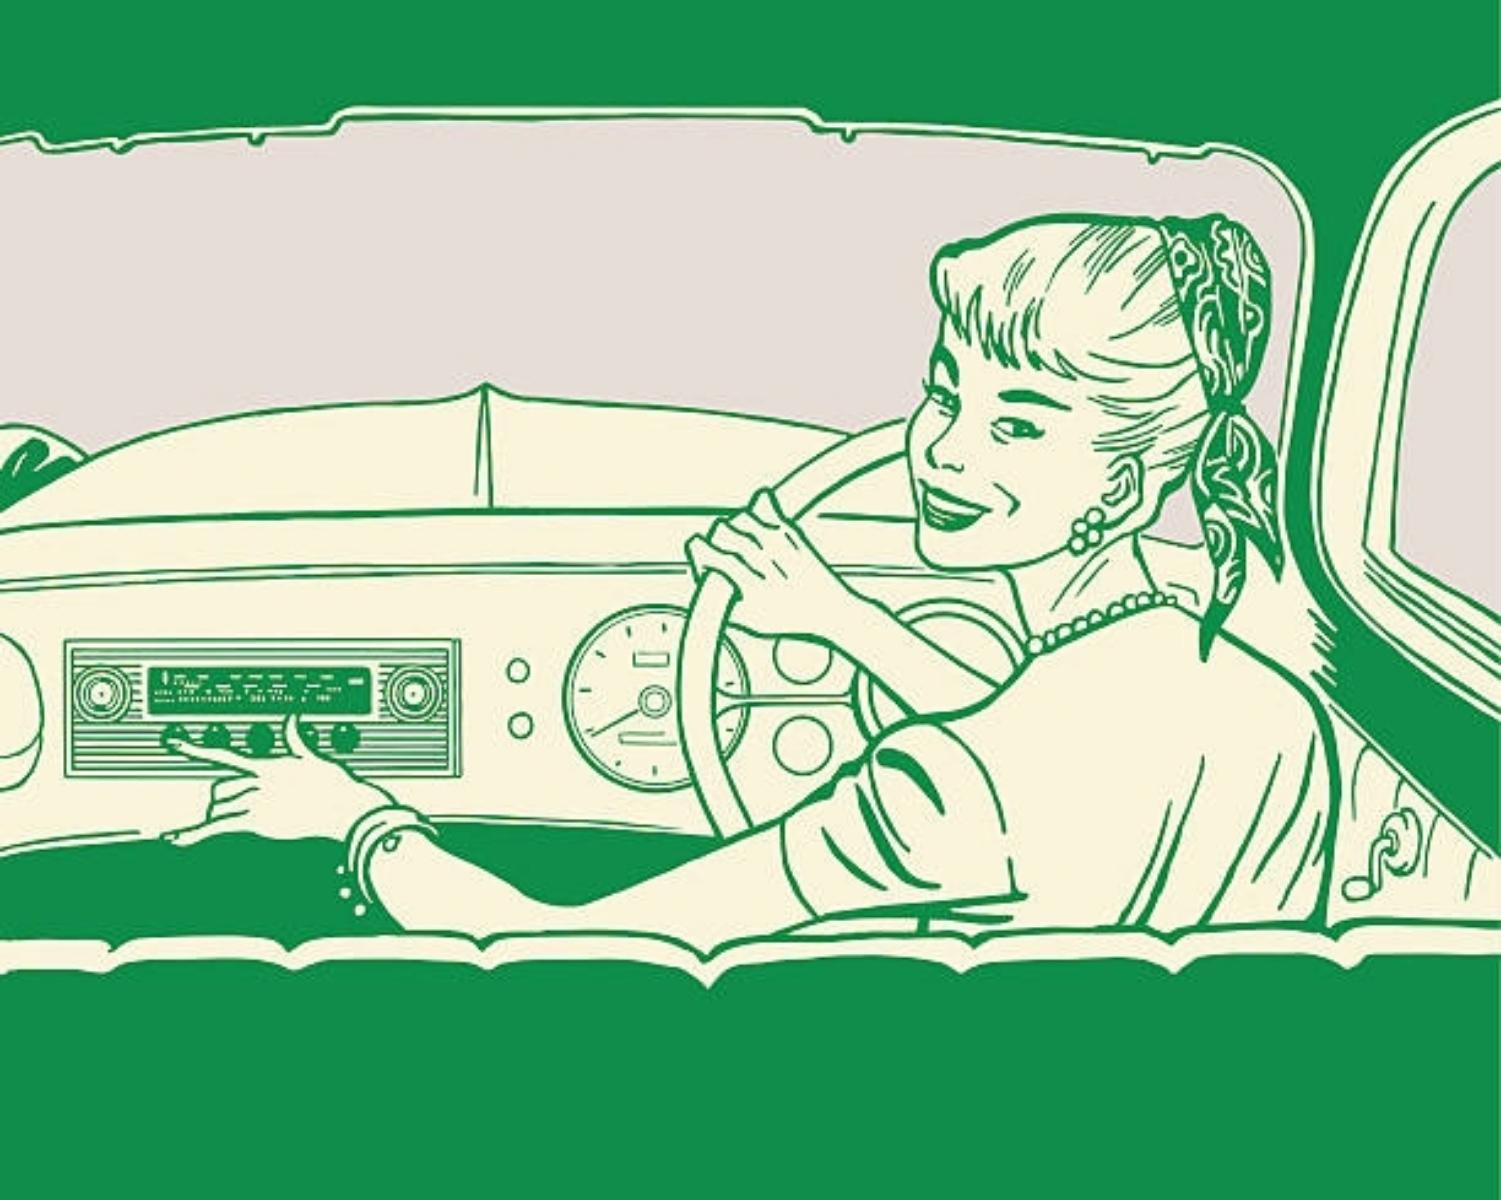 When were radios first fitted in cars?